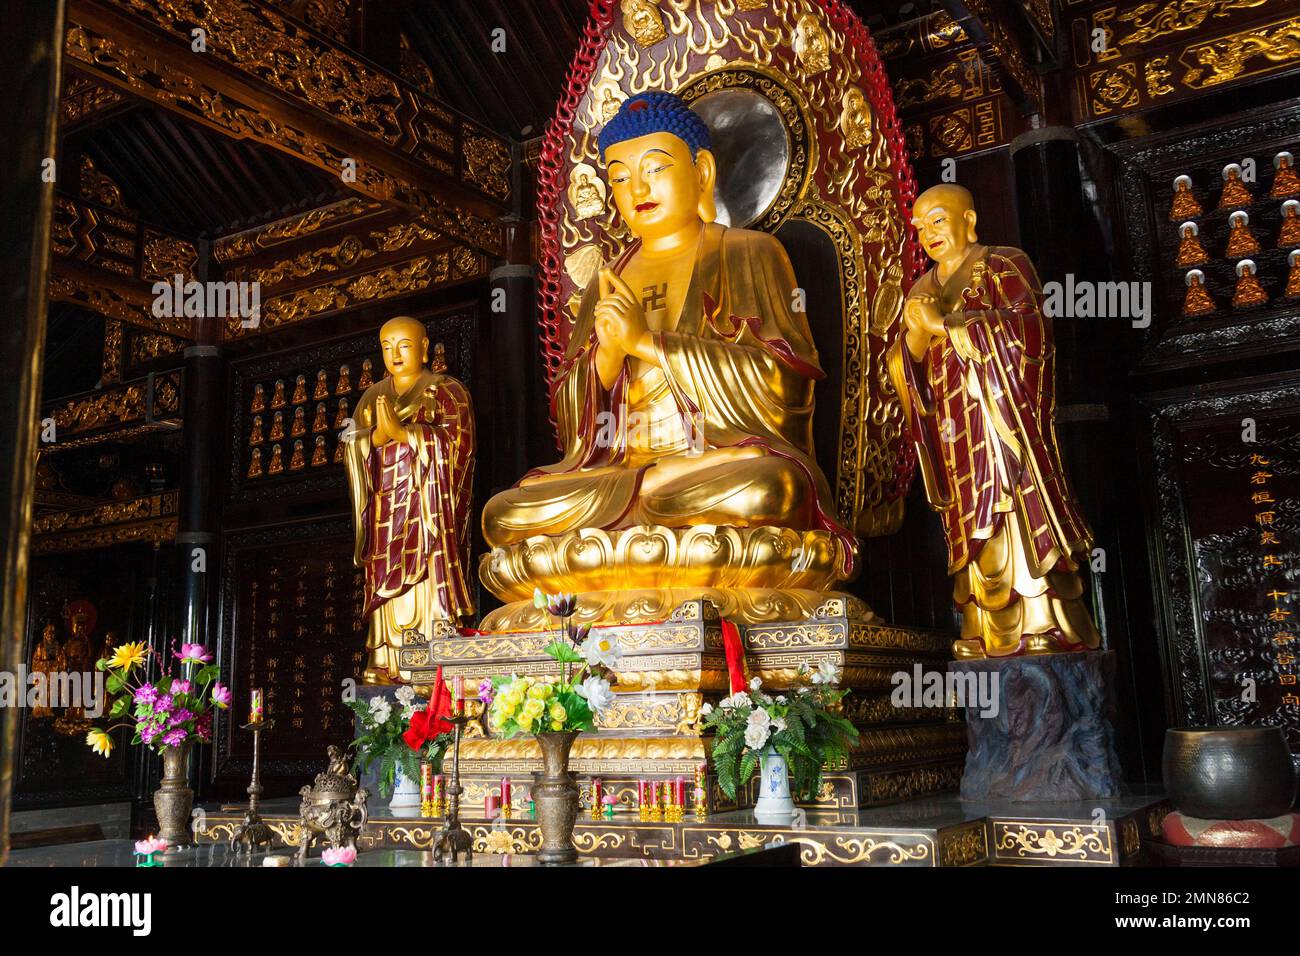 Buddhist shrine with golden Buddha on throne seat in the Hall of Sakyamuni inside the famous Daci'en Temple in the Yanta district of Xi'an. China. PRC. (125) Stock Photo